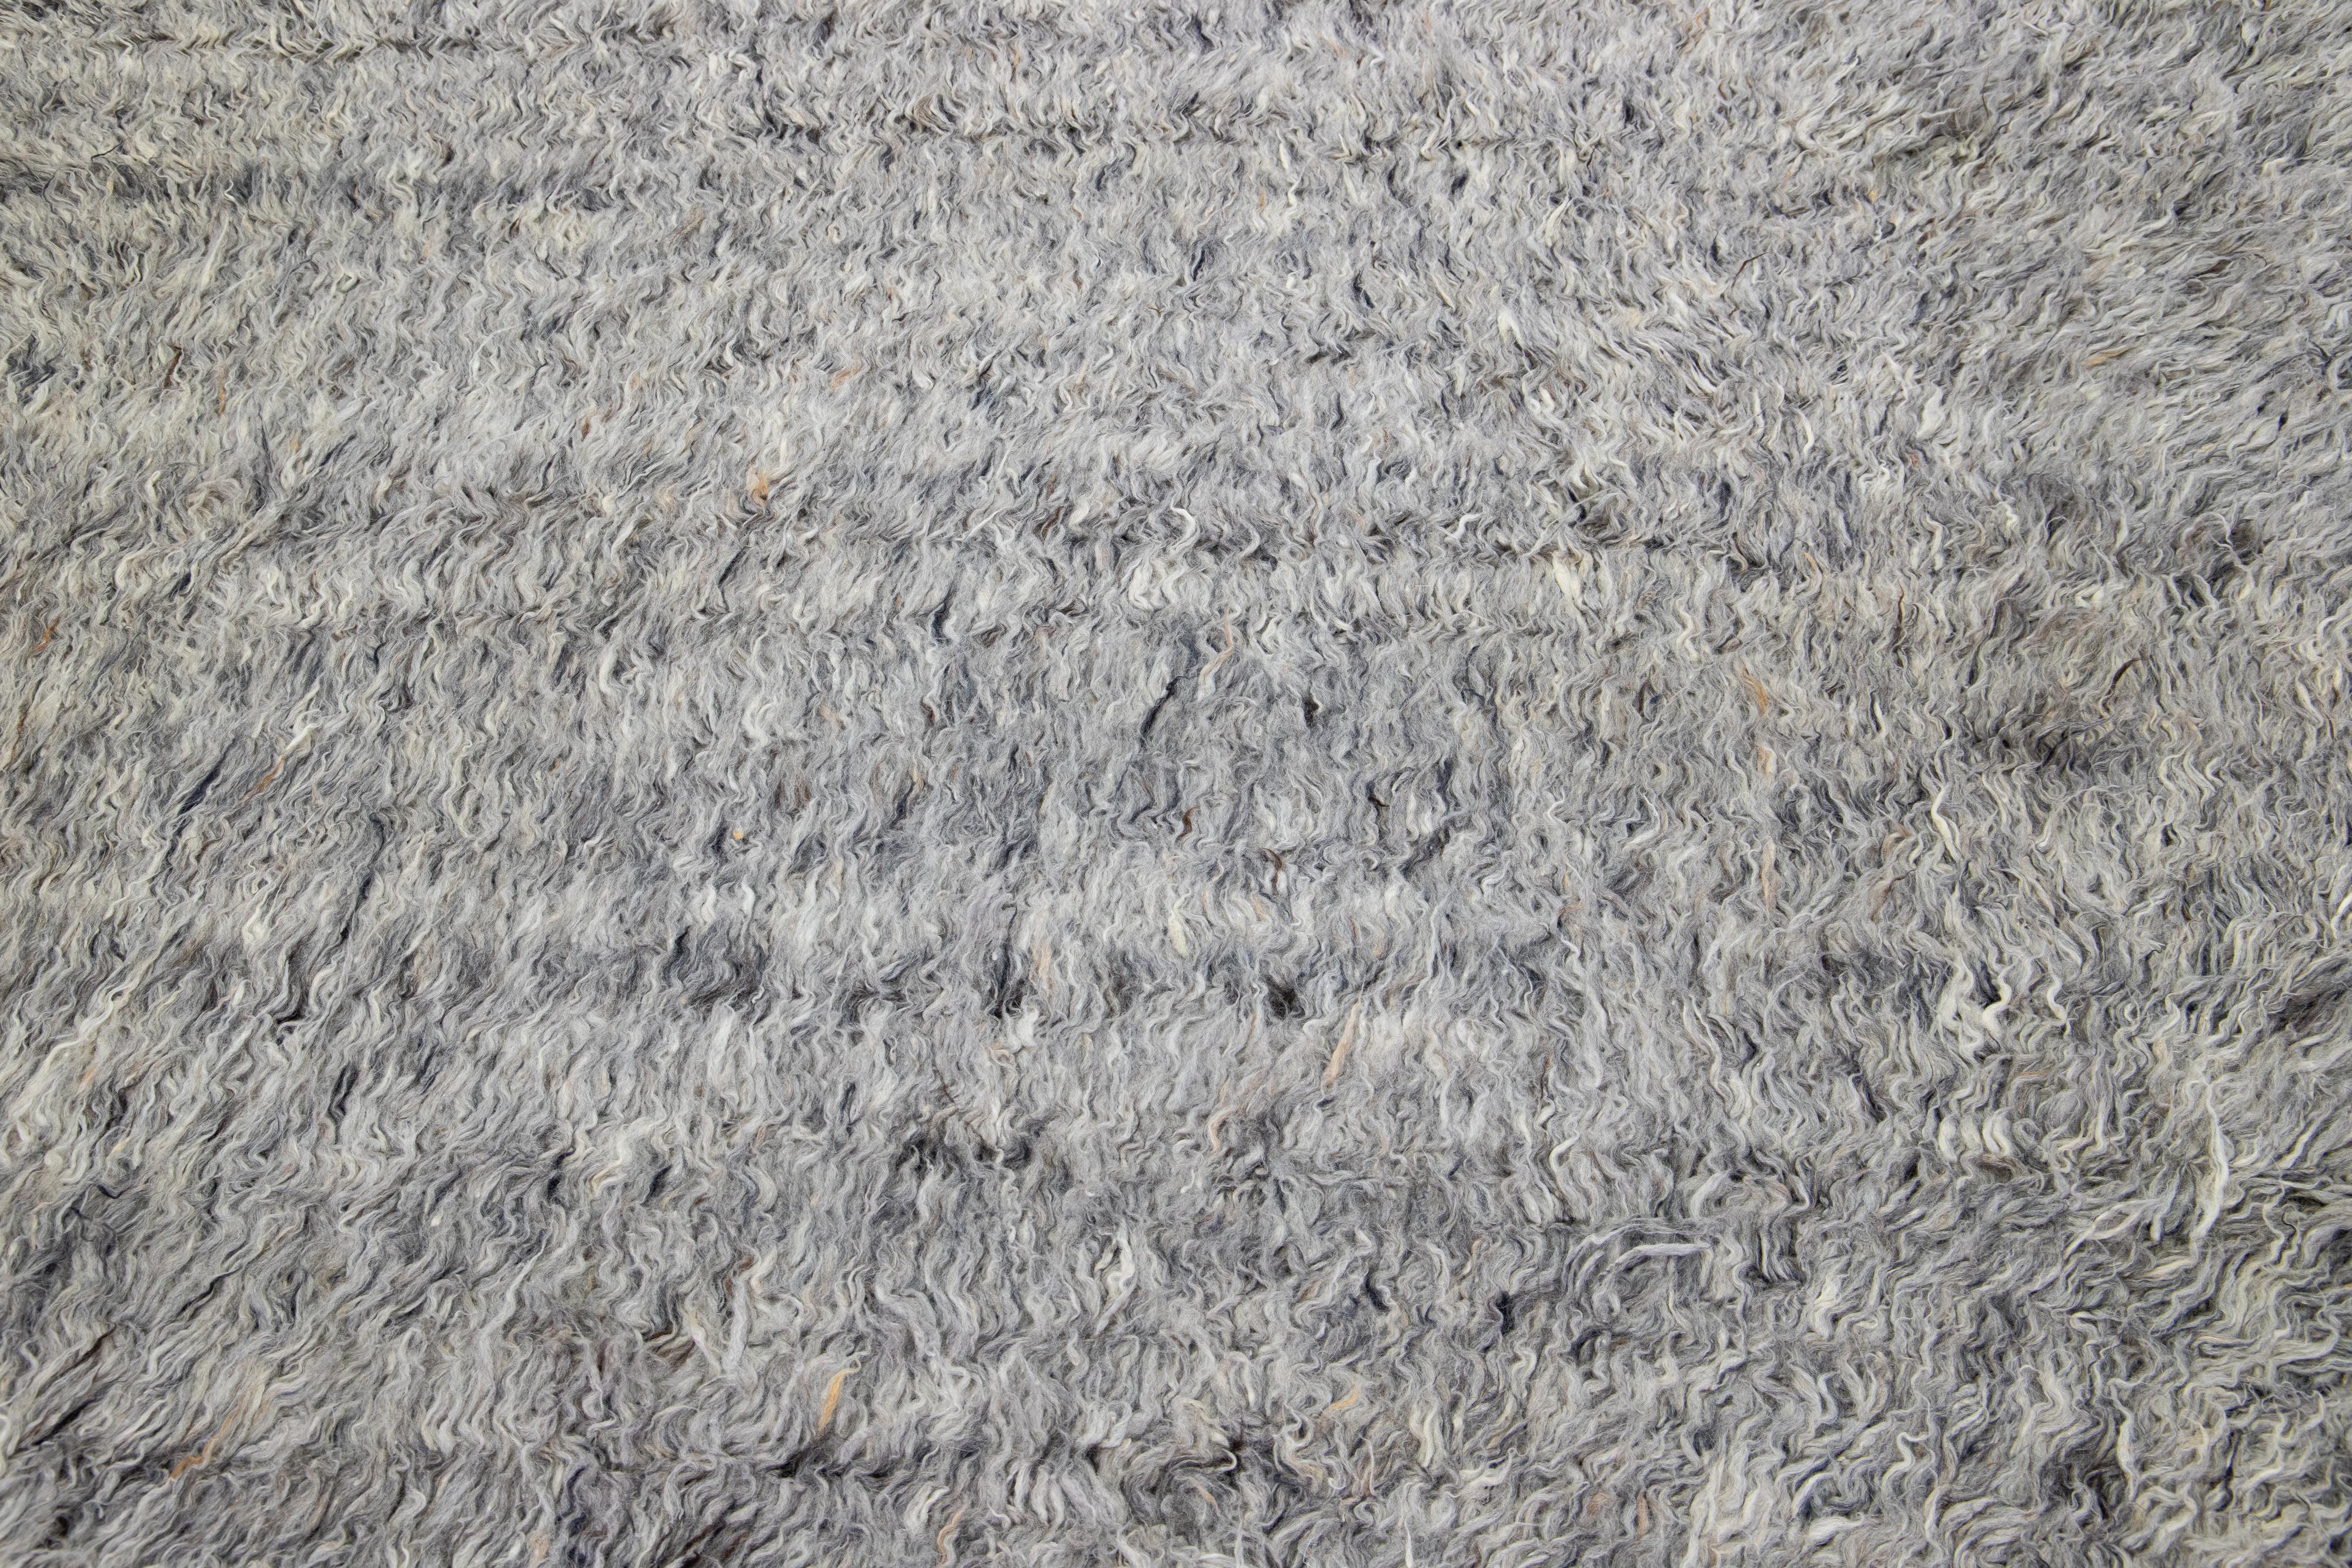 This hand-knotted rug is made from organic wool and has a chic Moroccan style. It showcases an enthralling background in tones of gray.

This rug measures 8'2' x 10'3